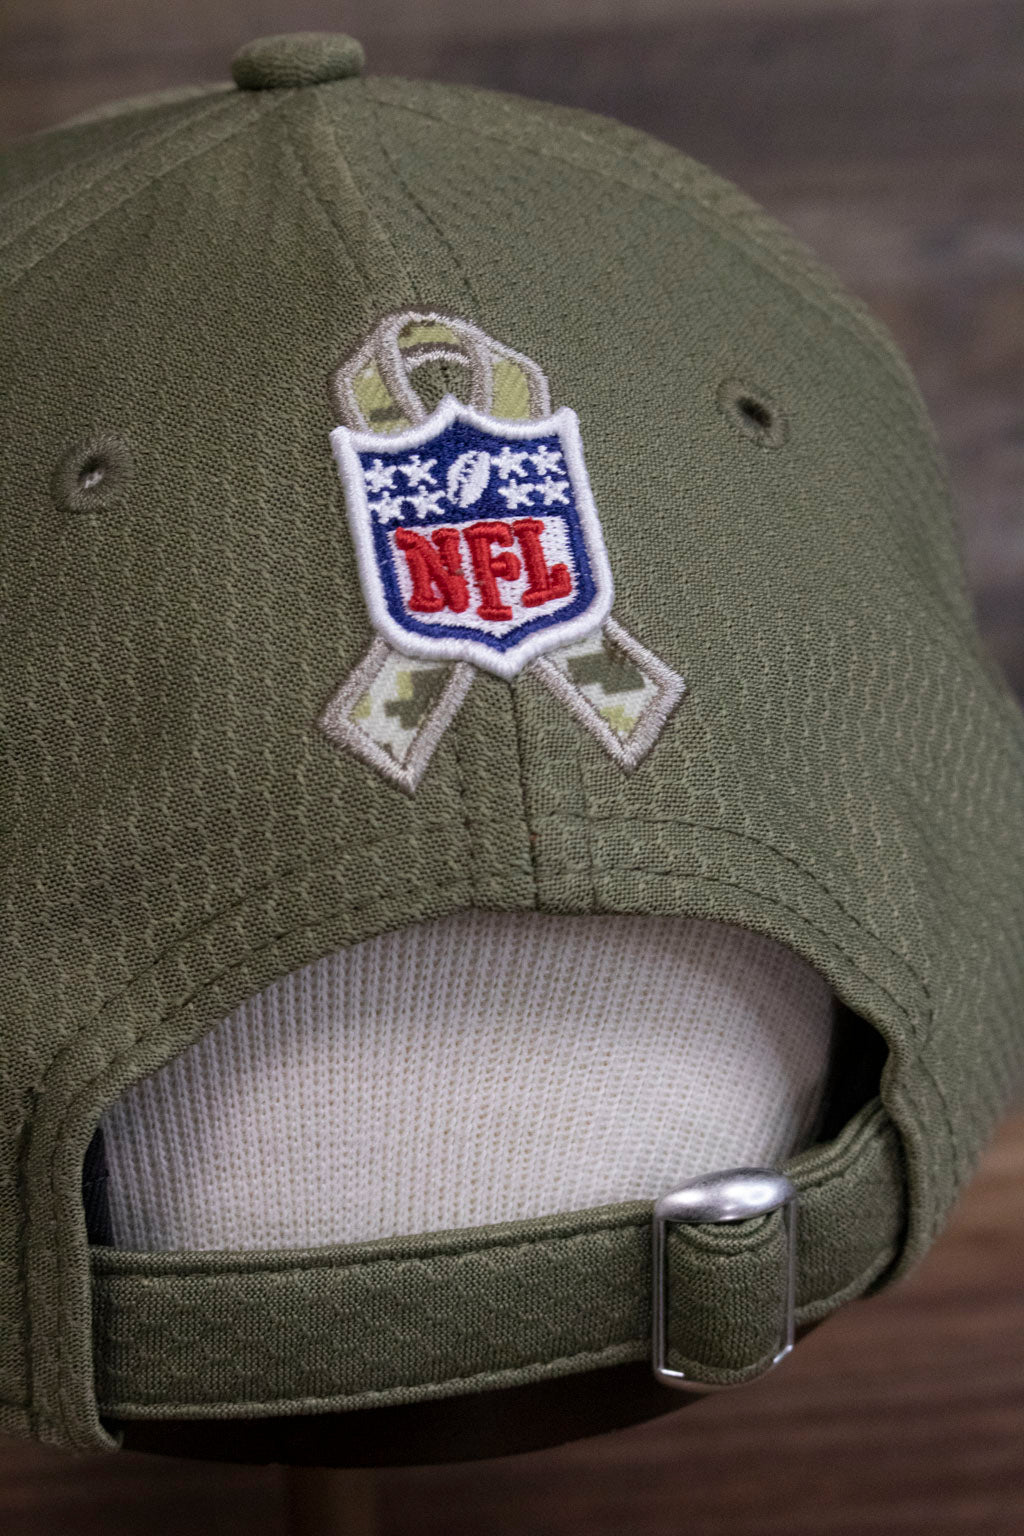 the NFL shield and camo Salute to Service ribbon on the Pittsburgh Steelers 2019 Salute To Service Dad Hat | Steelers On Field Olive Green Military Inspired Baseball Cap are made of raised embroidery